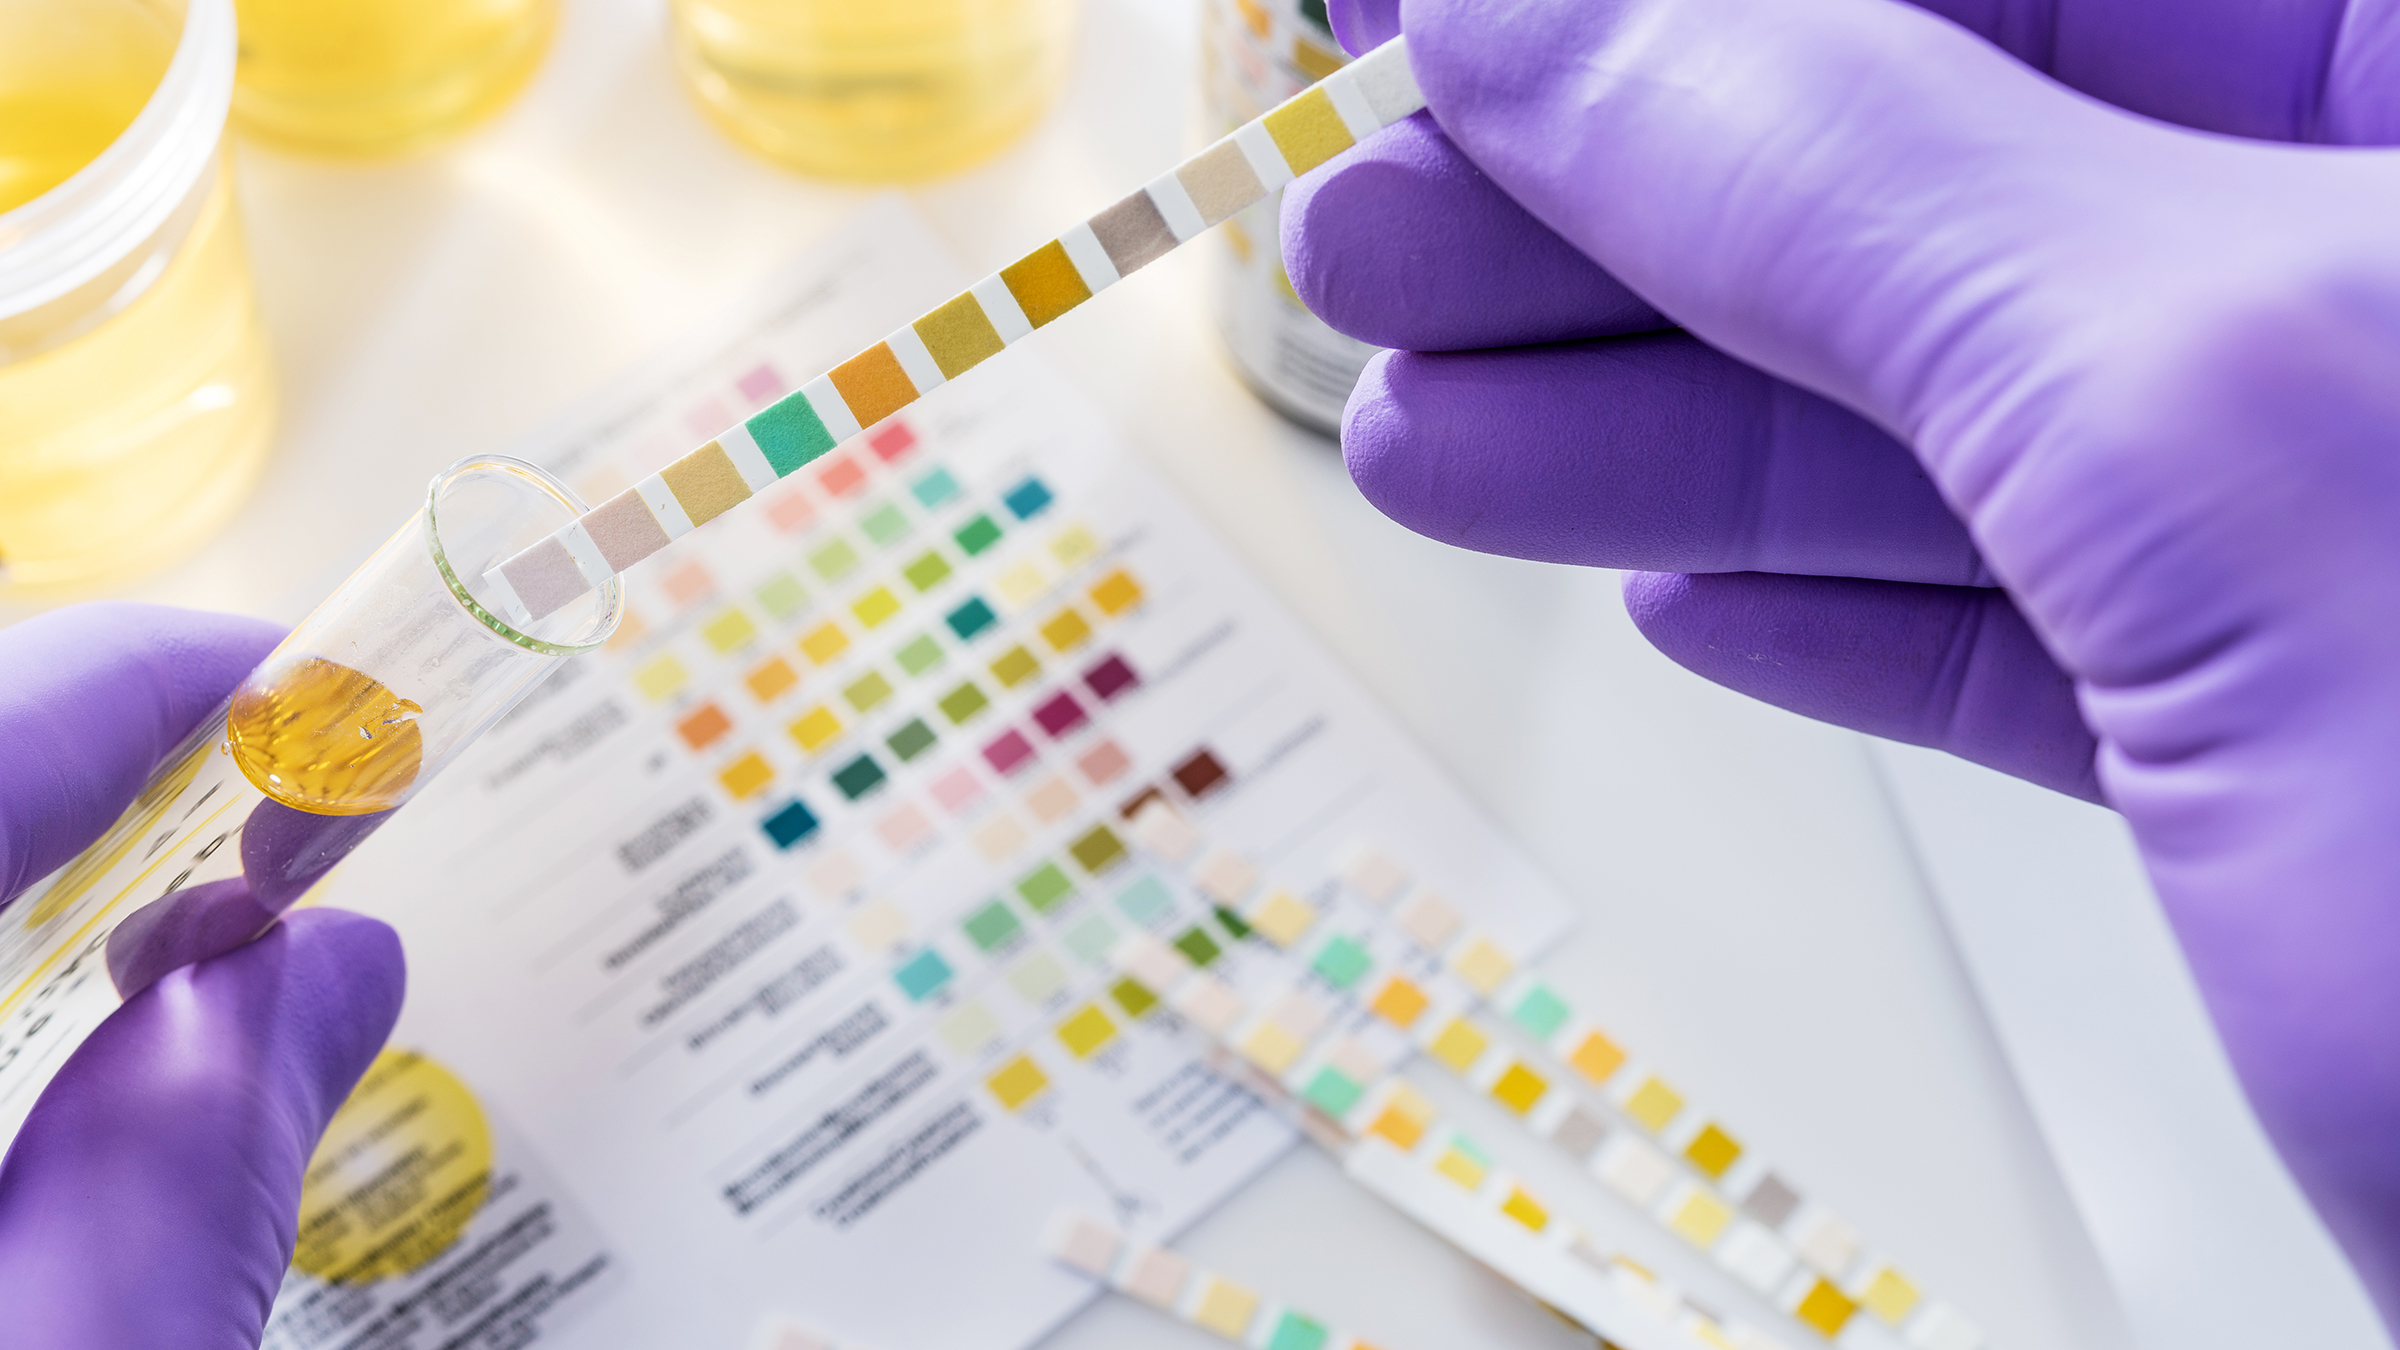 Gloved hands are holding a urine test strip.
Lothar Drechsel/iStock via Getty Image Plus